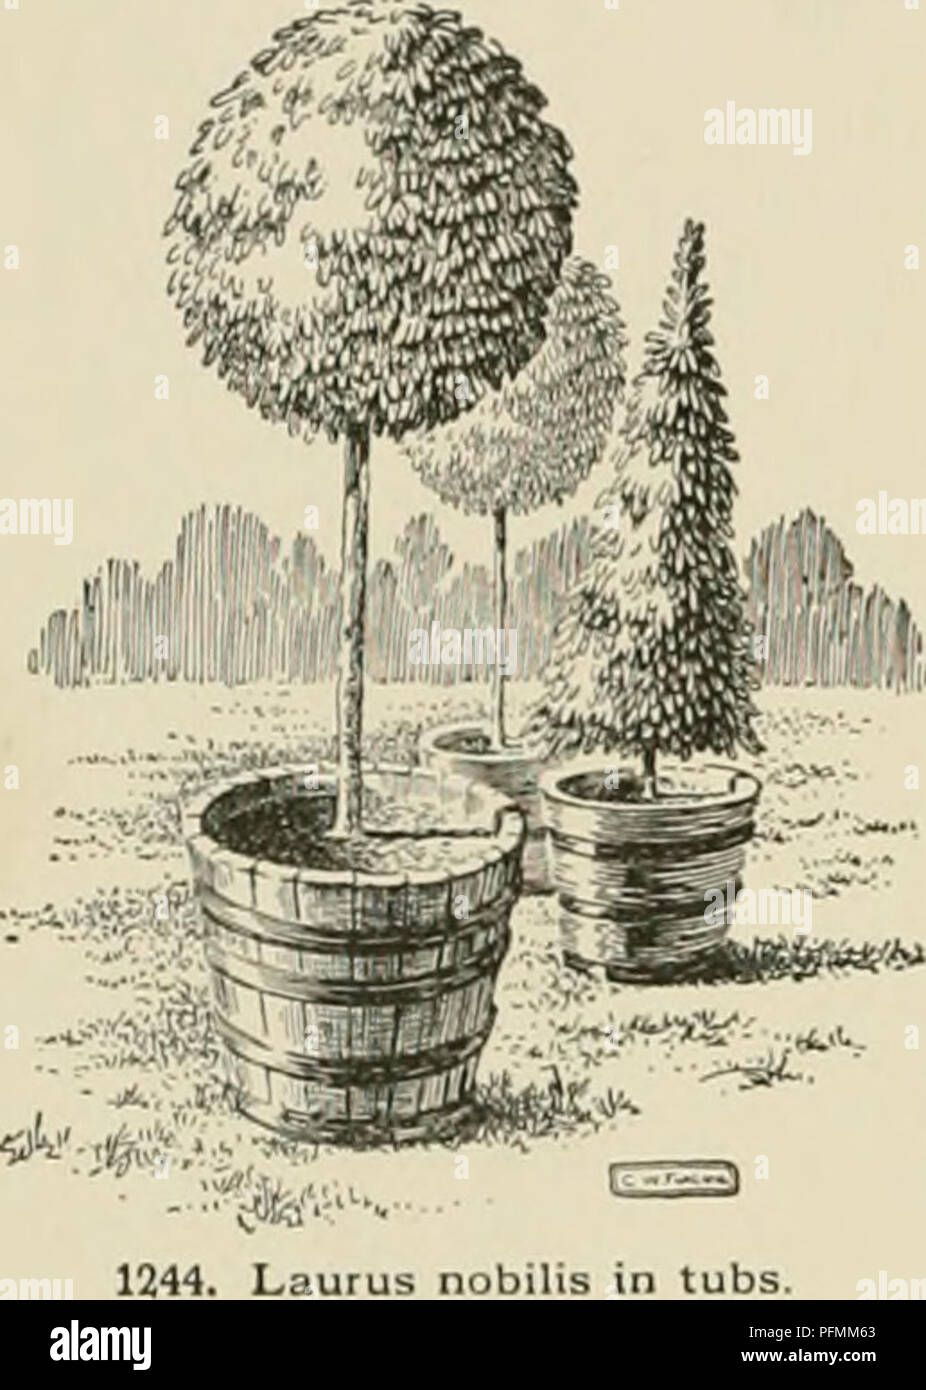 . Cyclopedia of American horticulture, comprising suggestions for cultivation of horticultural plants, descriptions of the species of fruits, vegetables, flowers, and ornamental plants sold in the United States and Canada, together with geographical and biographical sketches. Gardening. 890 LAURUS ferred to Laurus, but with the exception of two. these species are now placed in other genera. These two true Lauruses are L. nobilis, Linn, (the subject of this sketch), and L. Canariensis, Webb &amp; Berth., of the Canary Islands. The fls. are dicecious or perfect, small and inconspicuous, in small Stock Photo